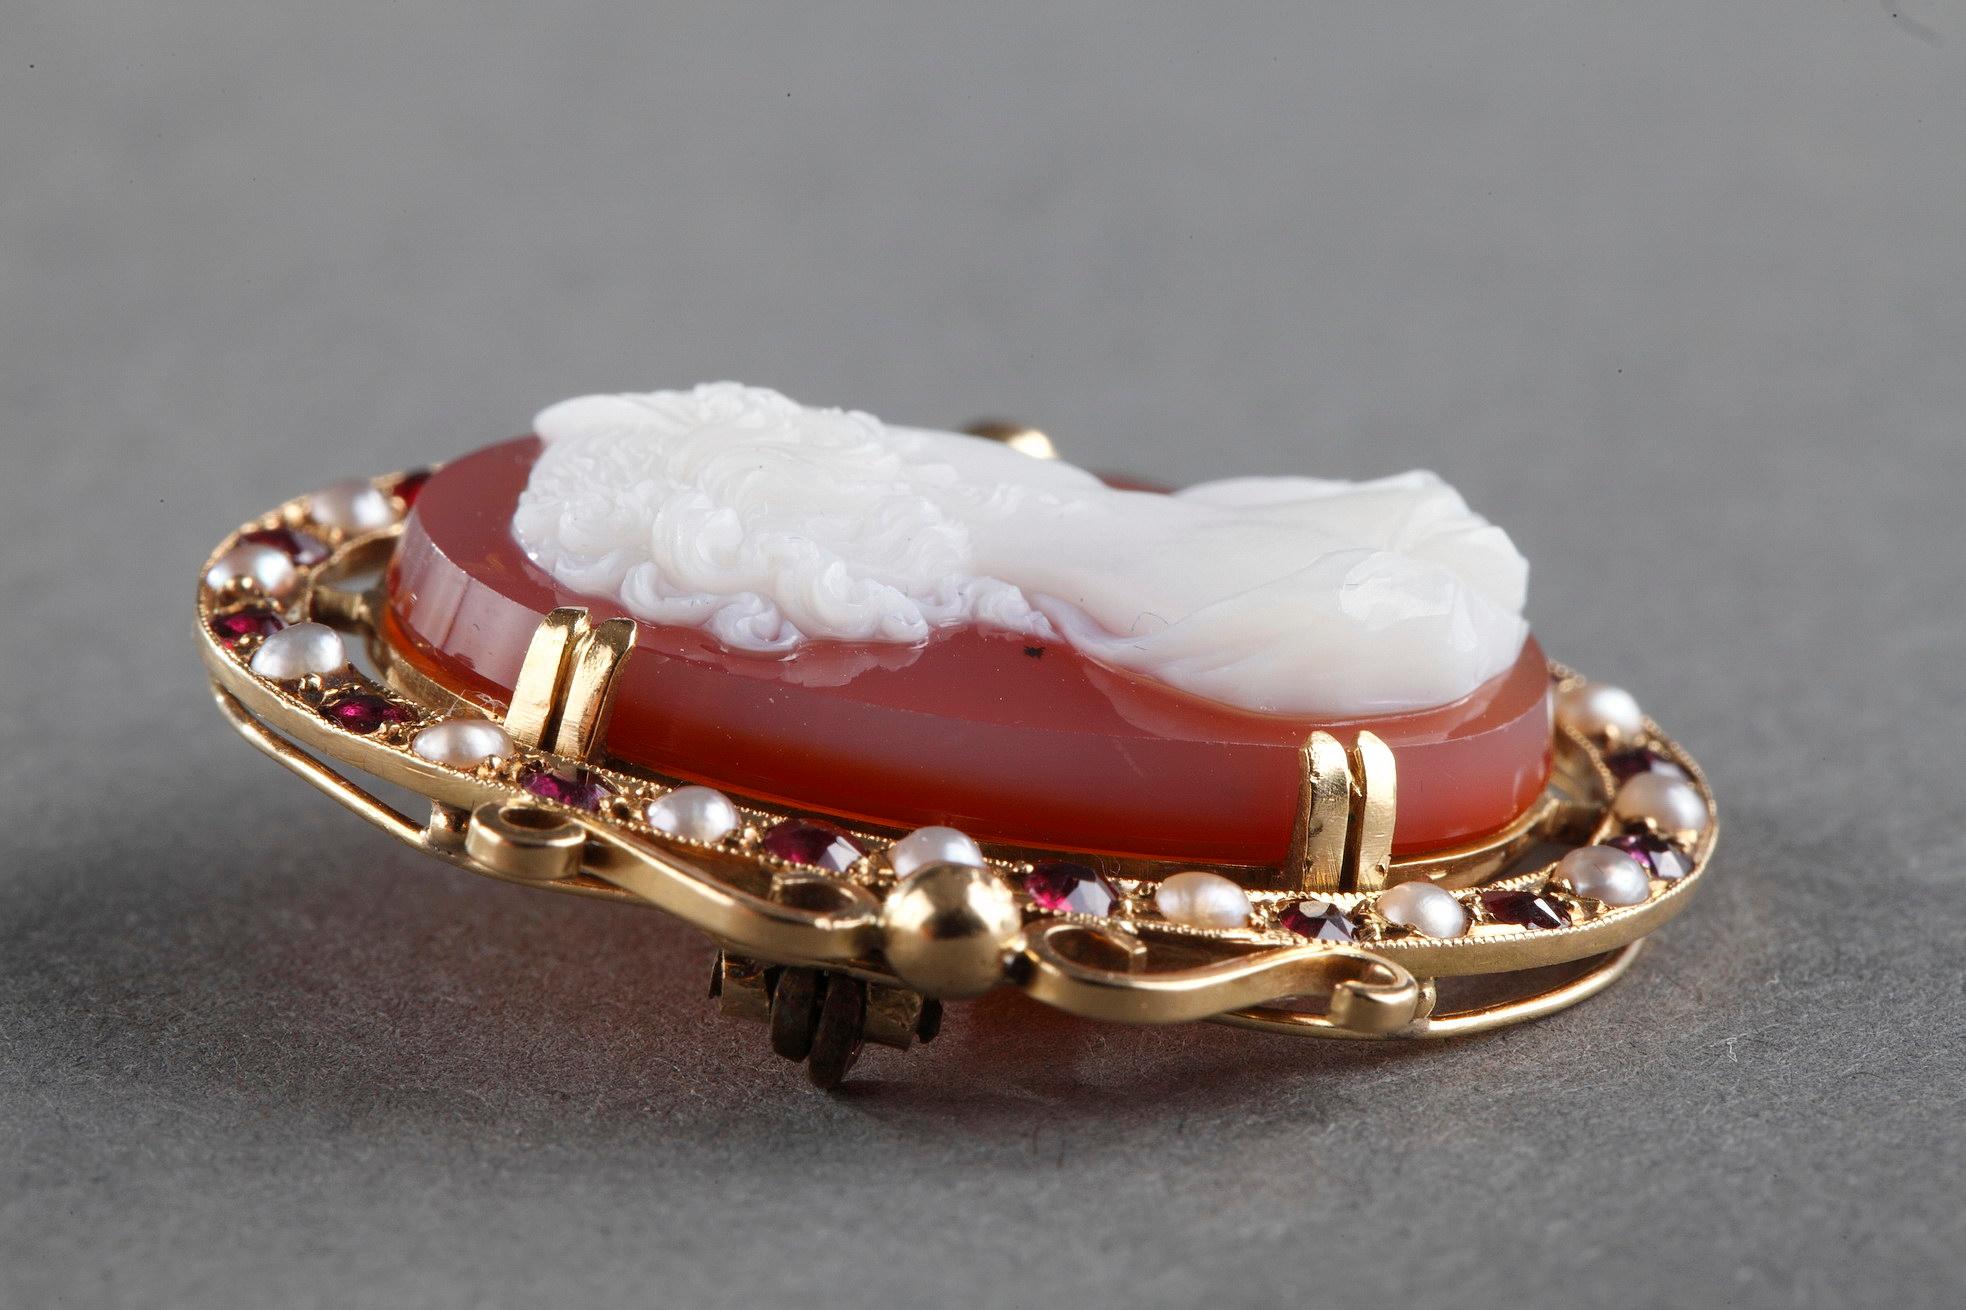 Gold Brooch with Agate Cameo and Pearls, Mid-19th Century For Sale 4